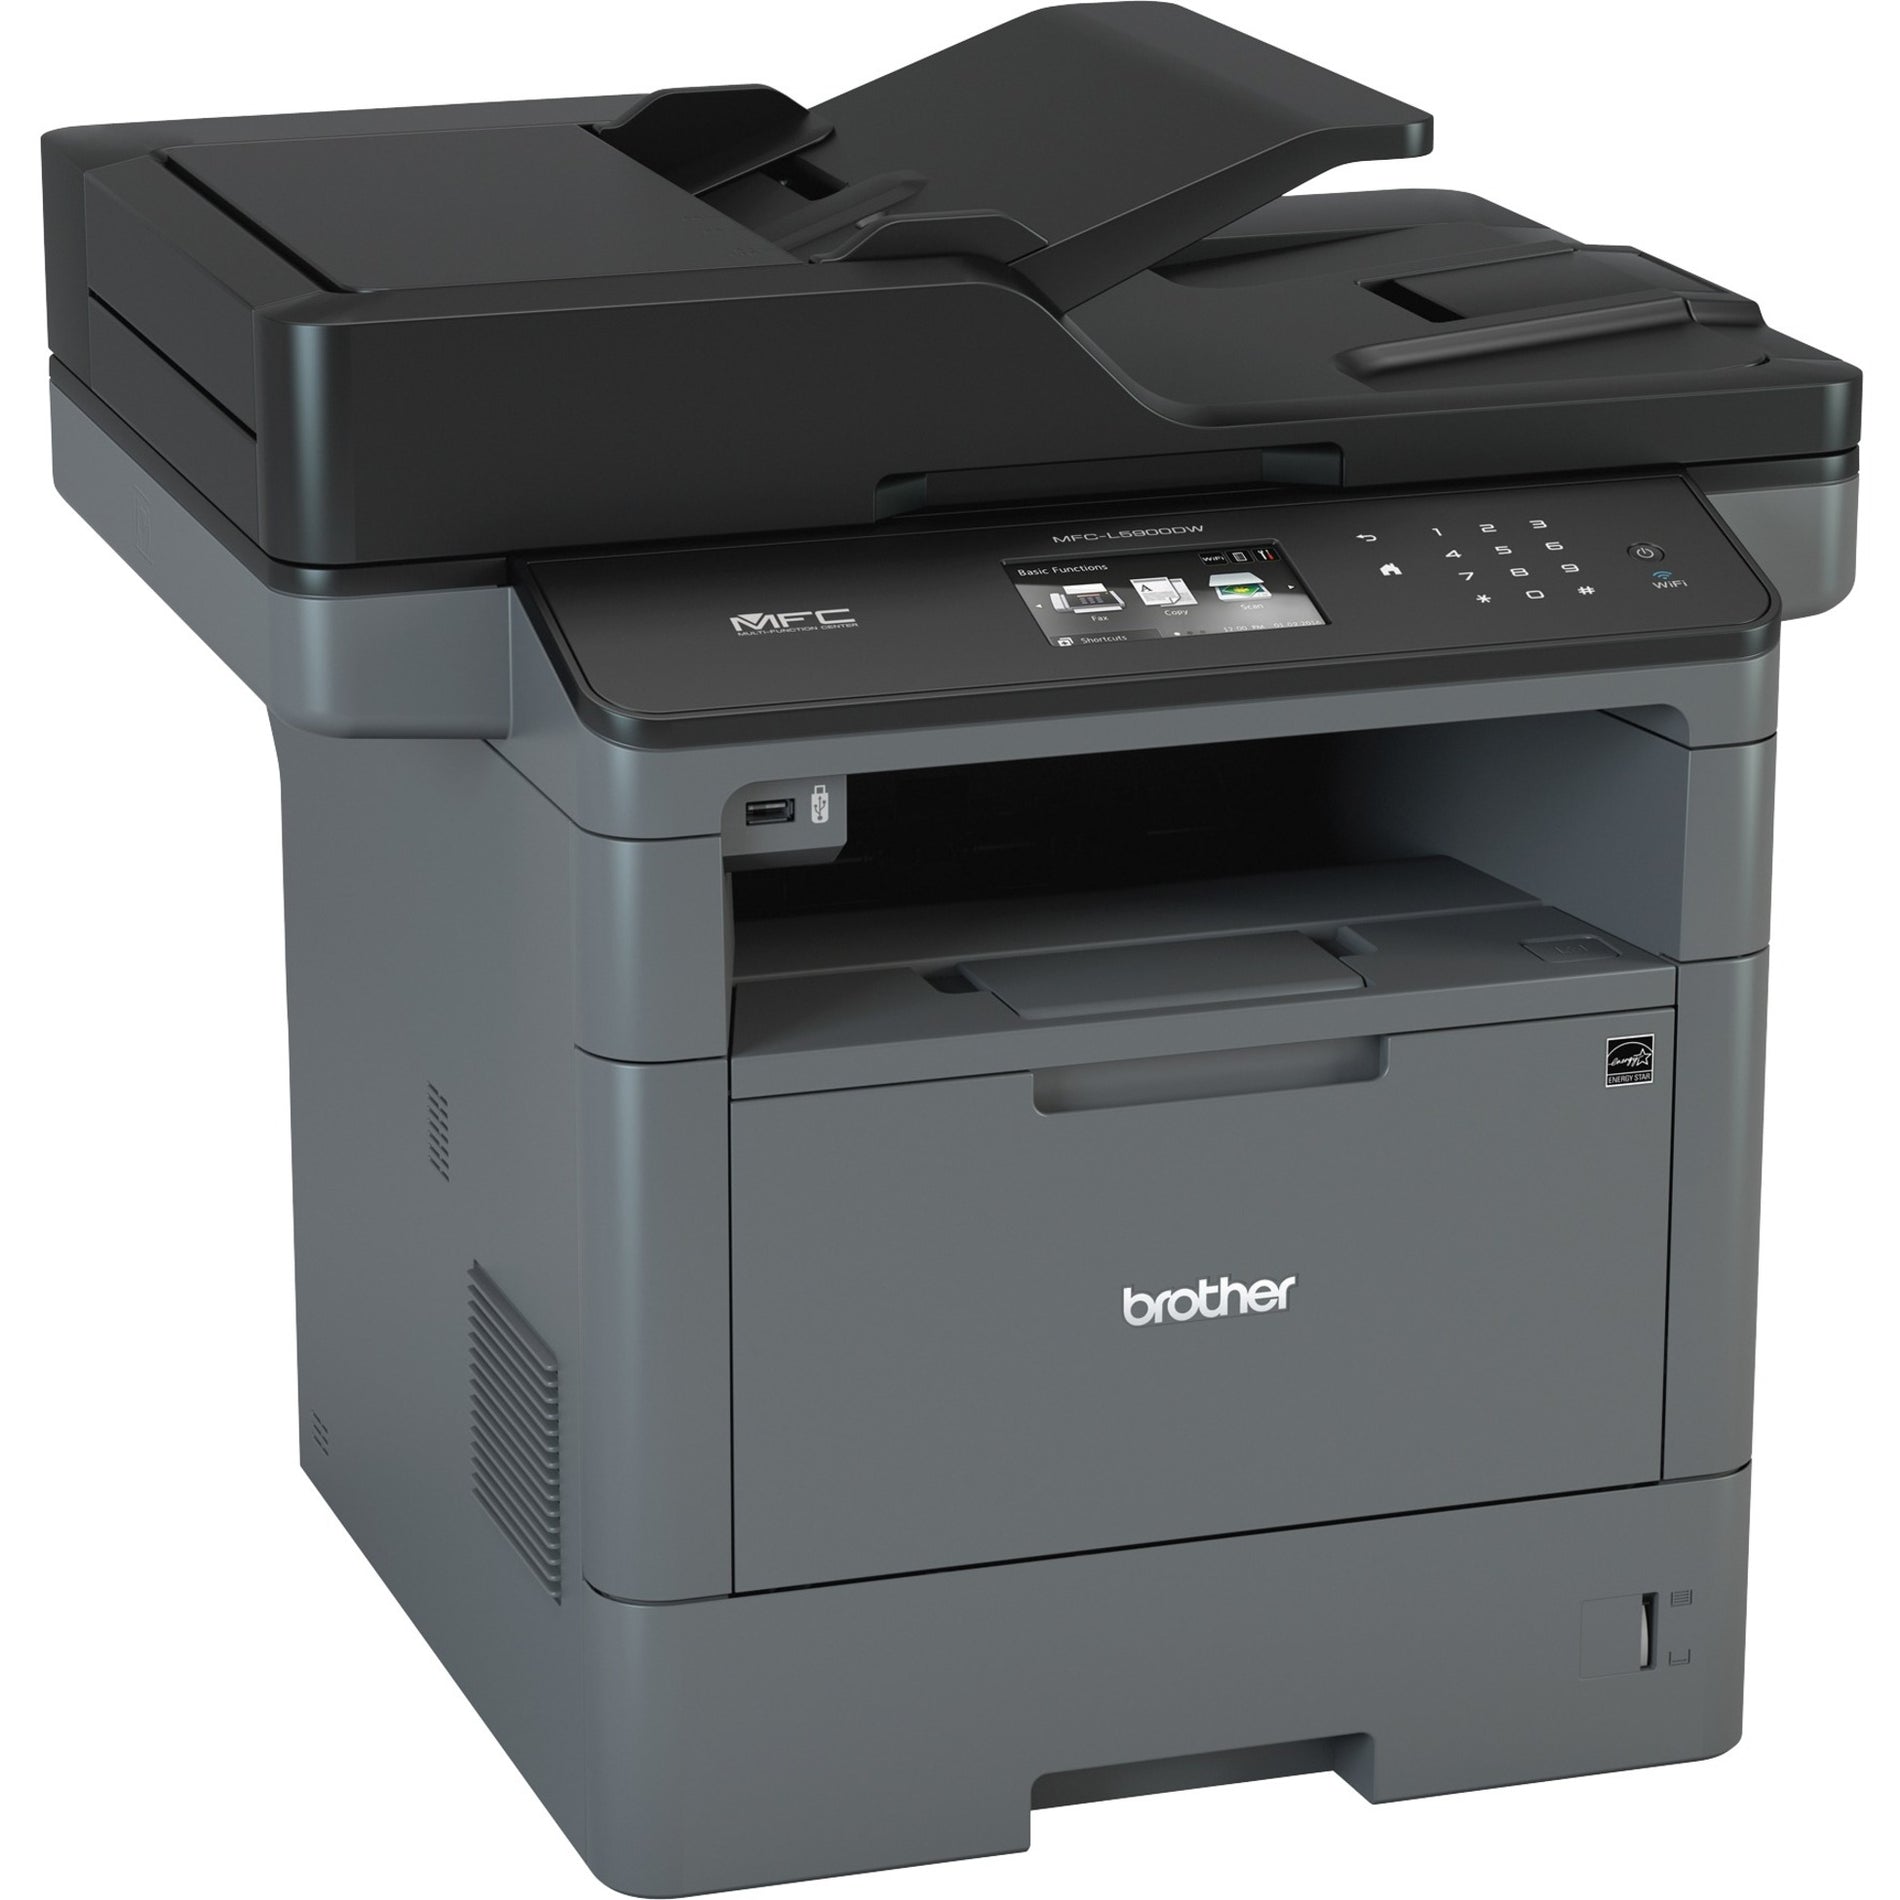 Brother MFCL5900DW All-In-1 Laser Printer, 42ppm, 300 Sheet Capacity, Black/Gray